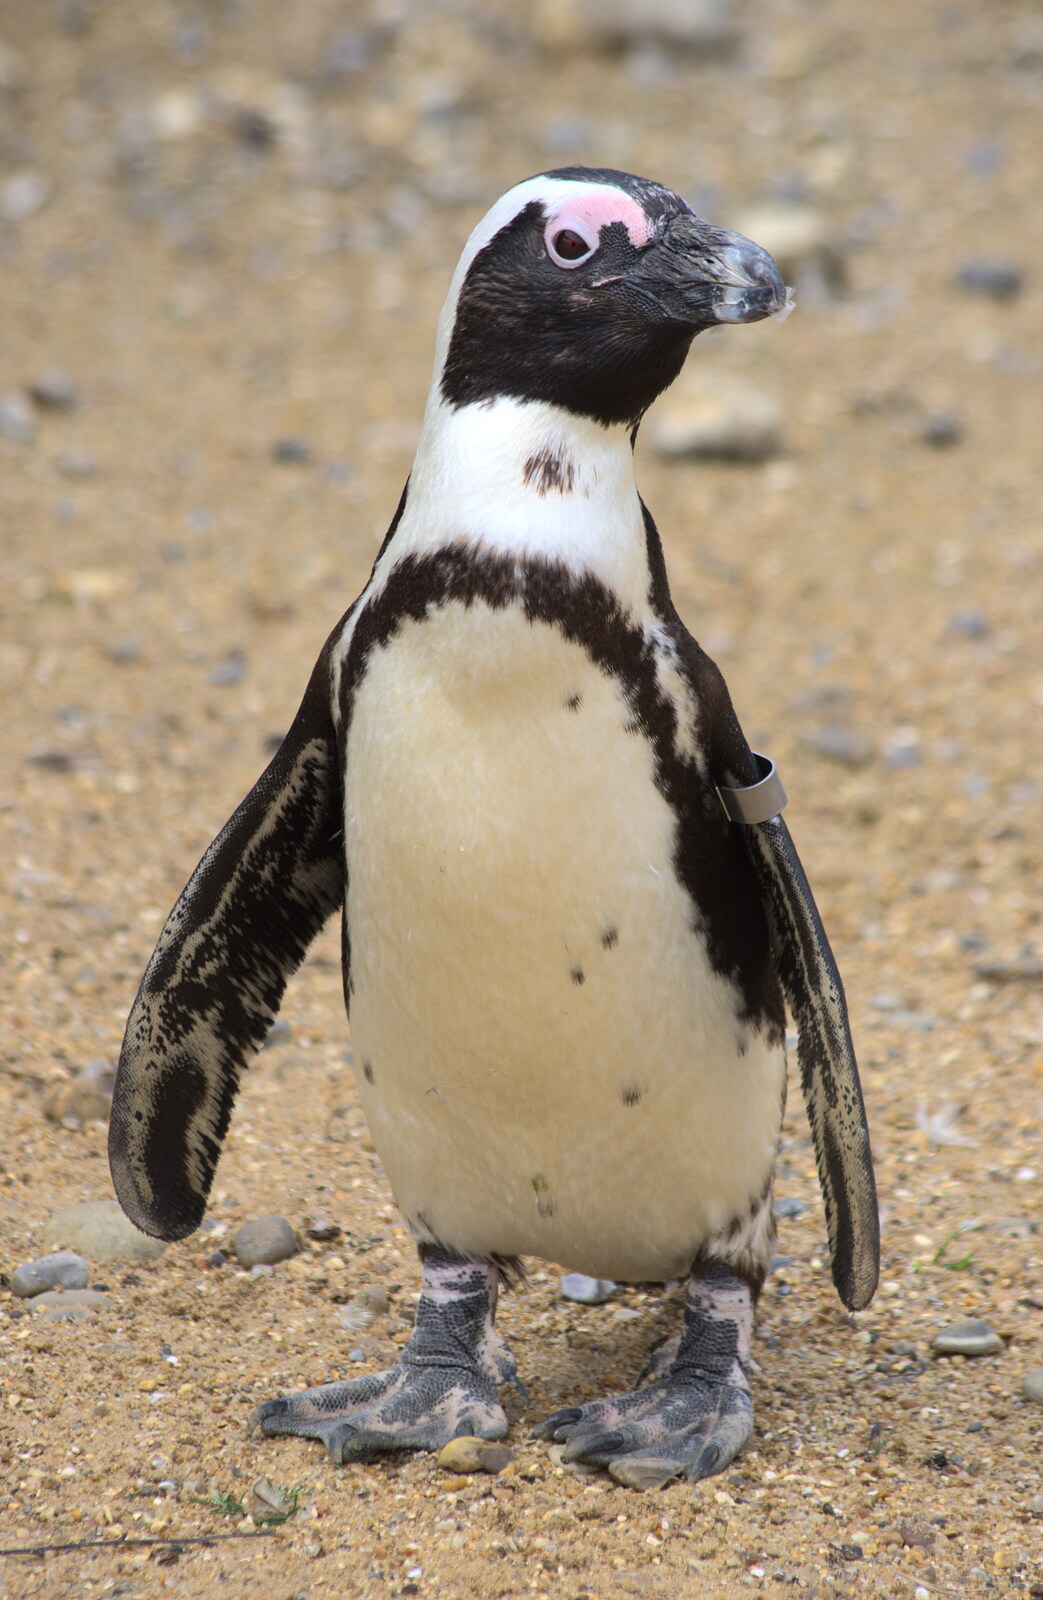 A Birthday Trip to the Zoo, Banham, Norfolk - 26th May 2014: Walk like a penguin